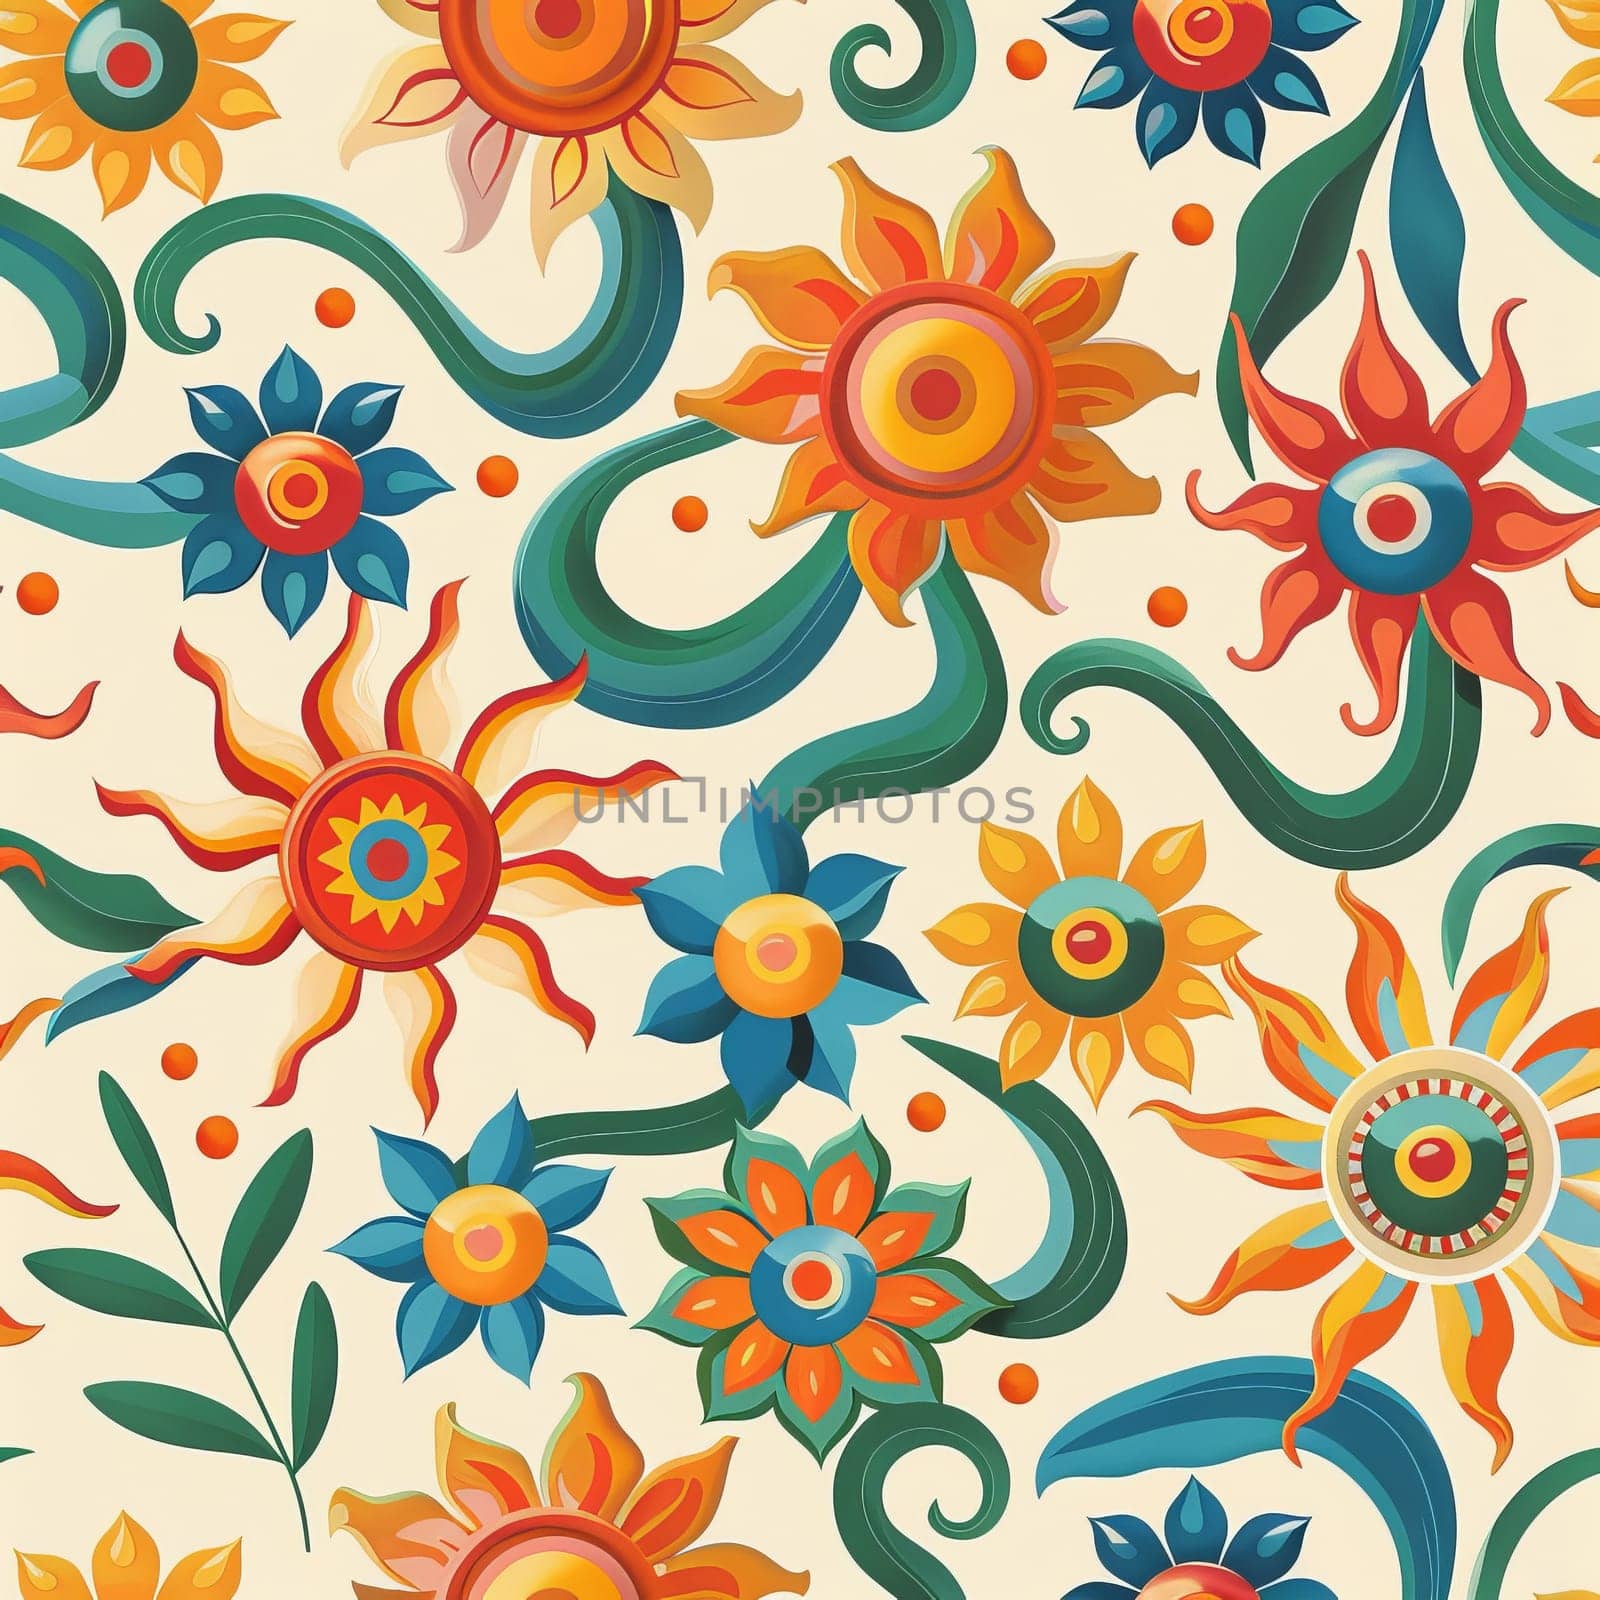 A colorful floral pattern with suns and leaves by itchaznong